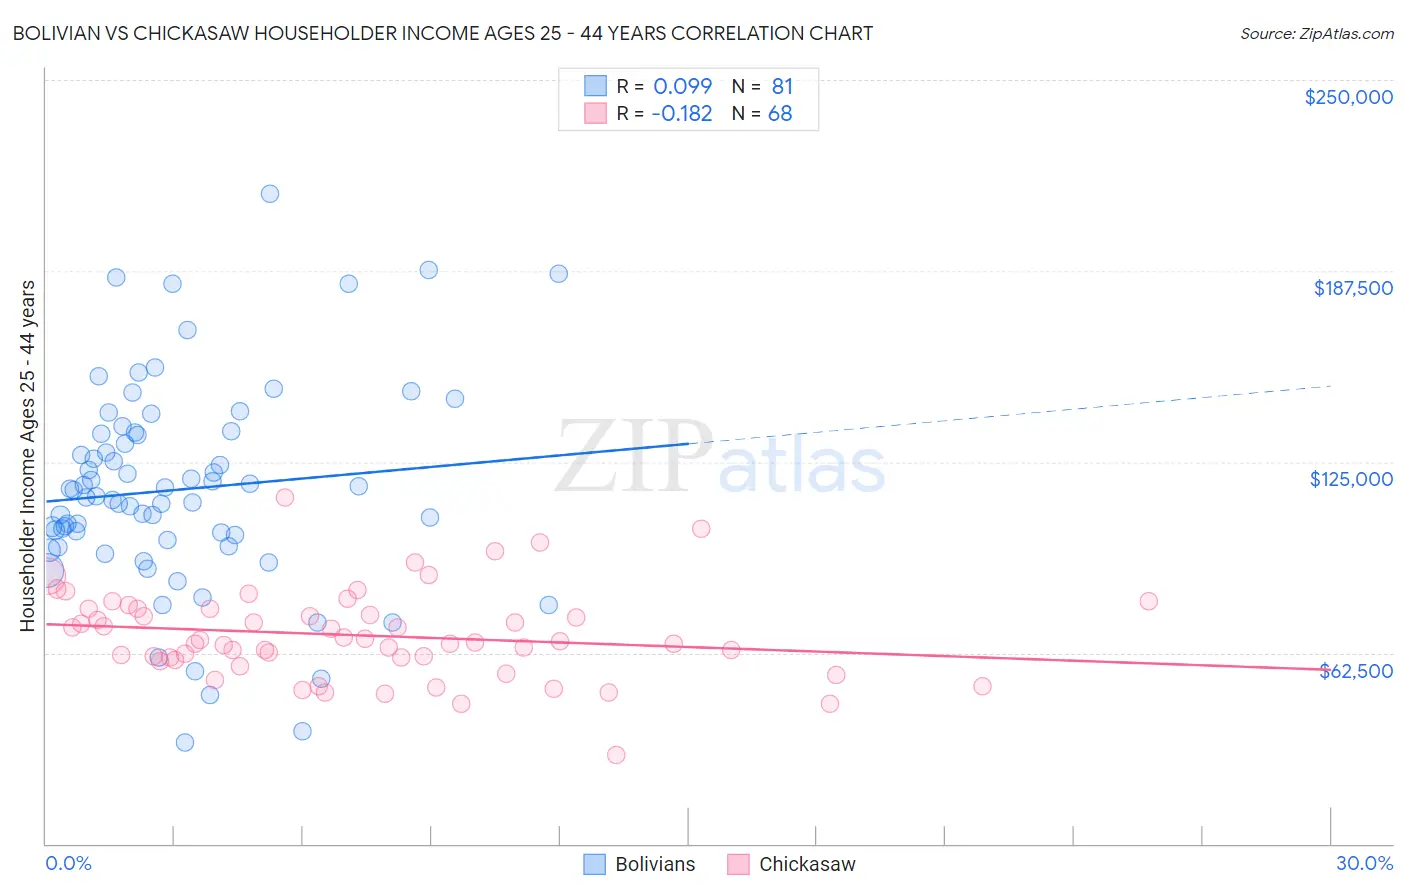 Bolivian vs Chickasaw Householder Income Ages 25 - 44 years